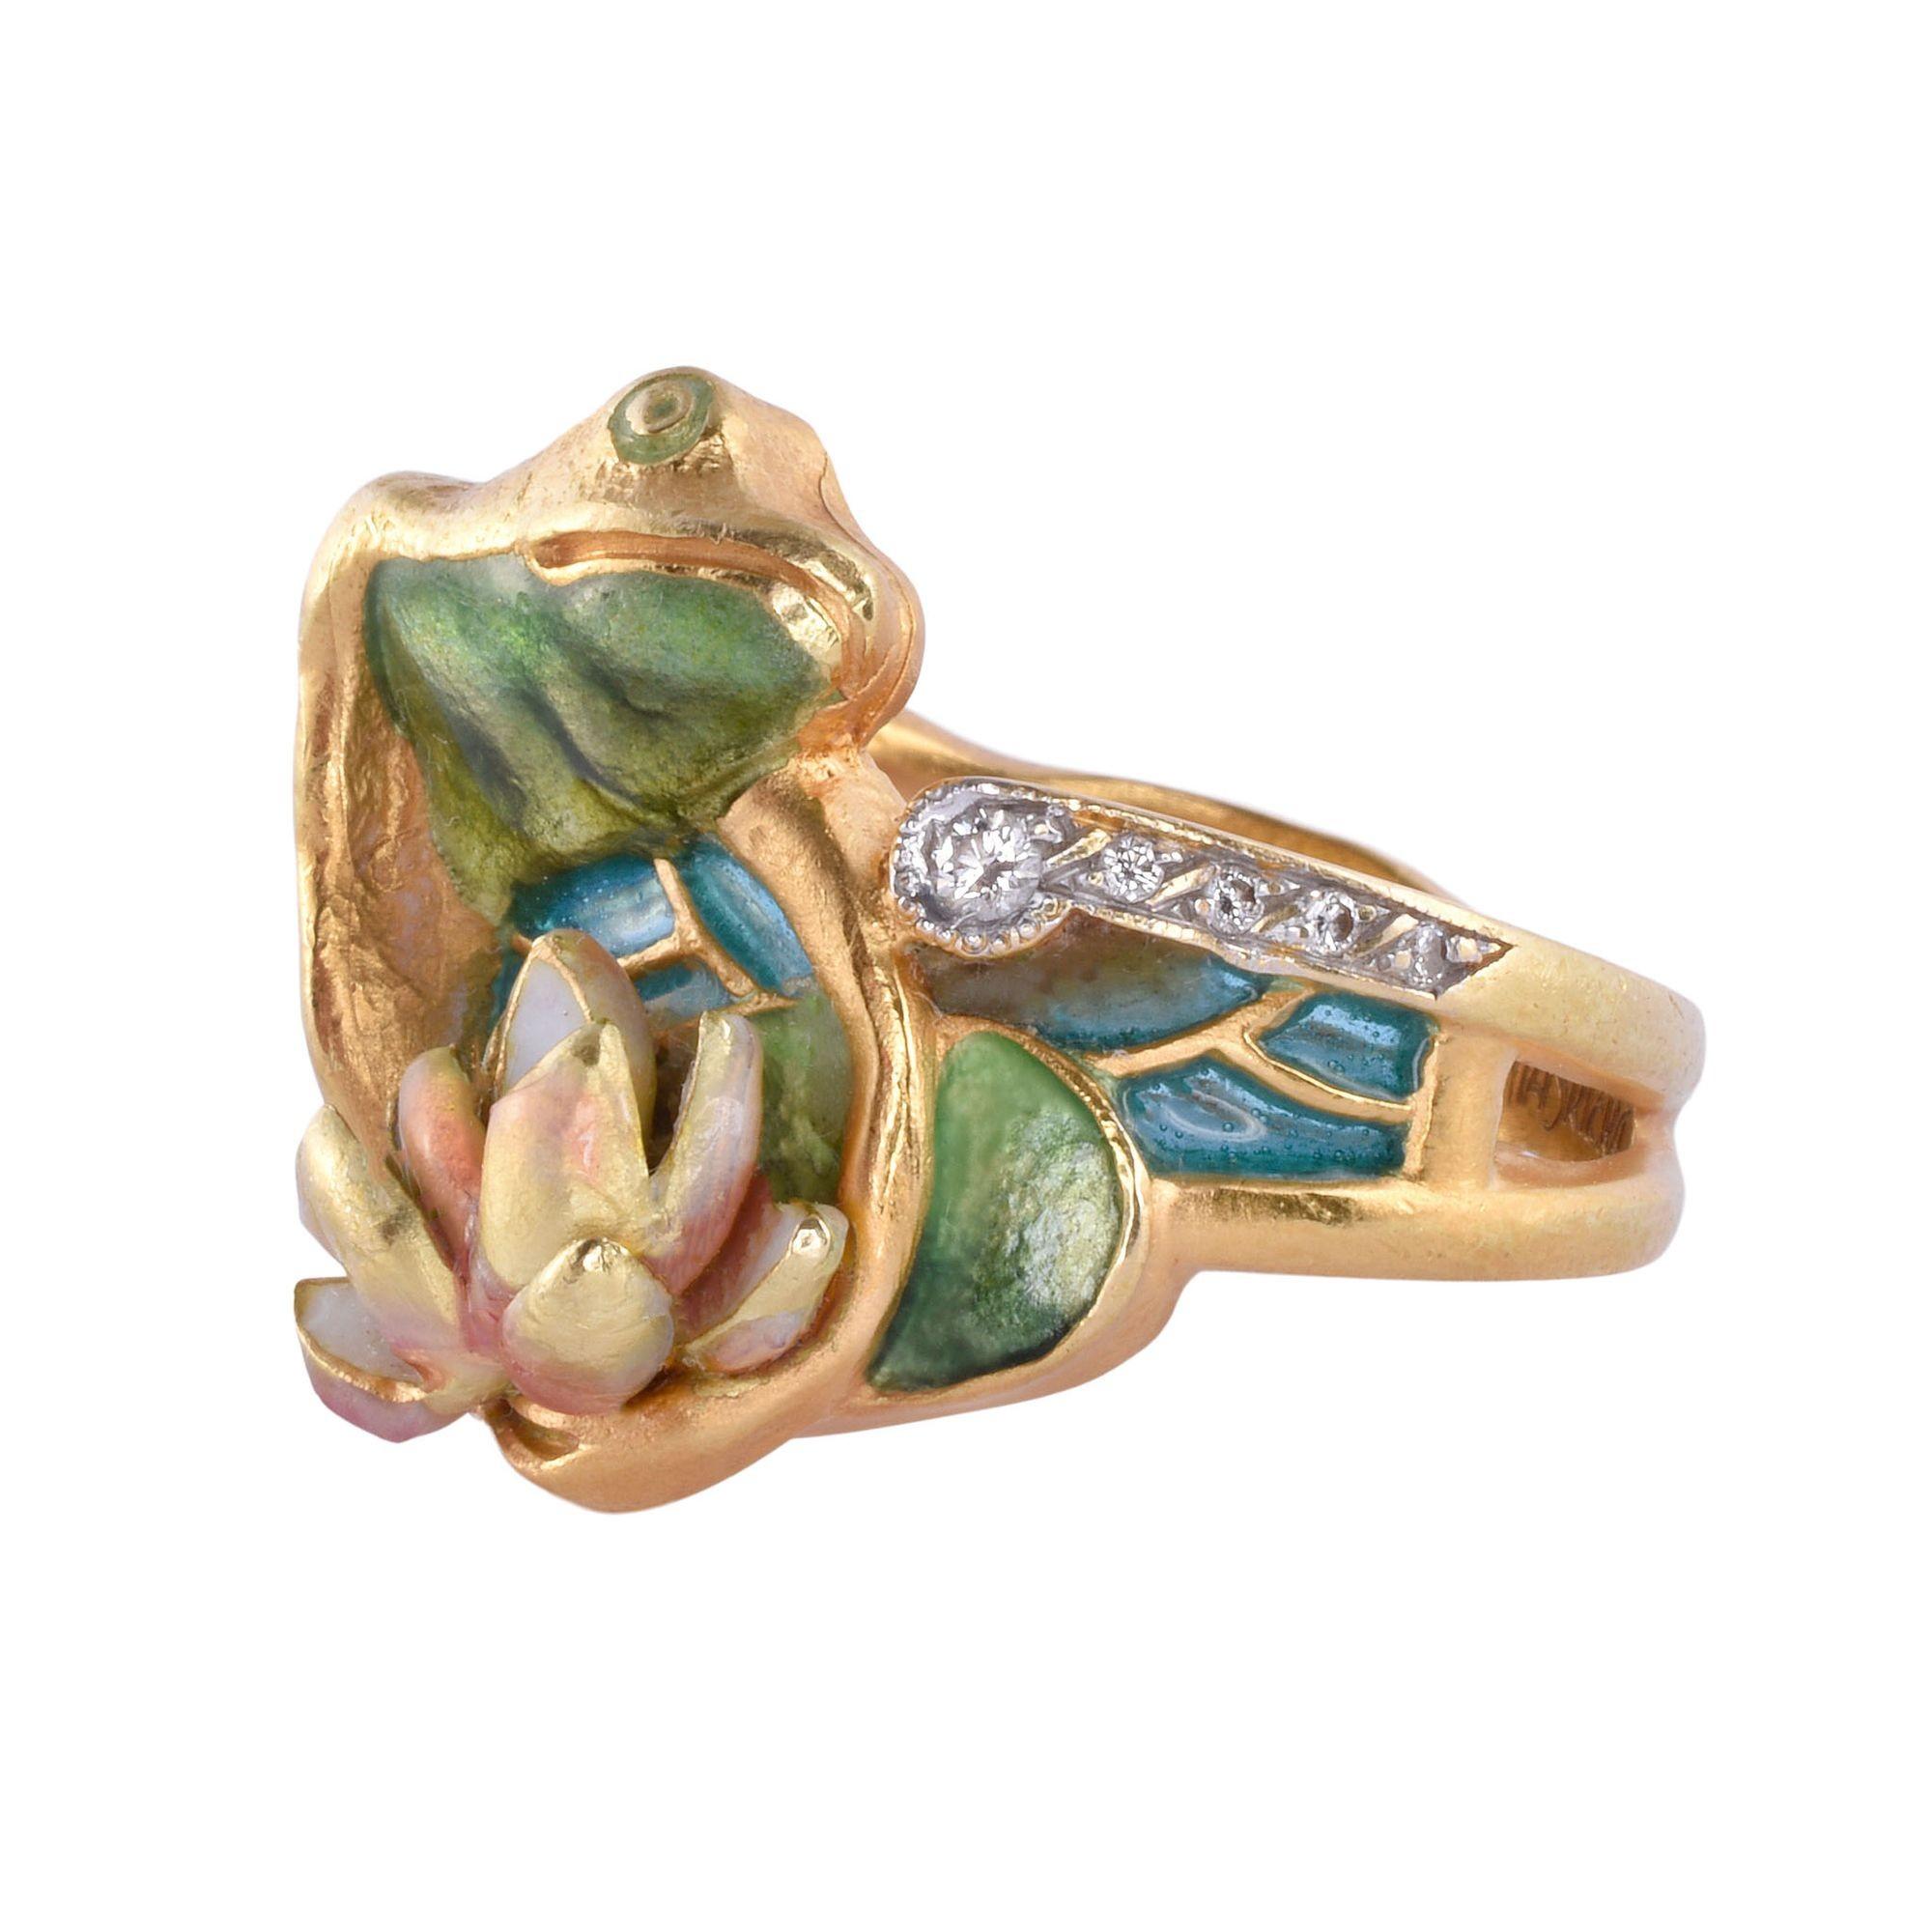 Estate Masriera 18K enamel frog & water lily ring, circa 1980. This 18 karat yellow gold ring signed by Masriera features a frog and water lily design with full cut diamond accents at .08 carat total weight. The diamonds have VS1 clarity and F-G